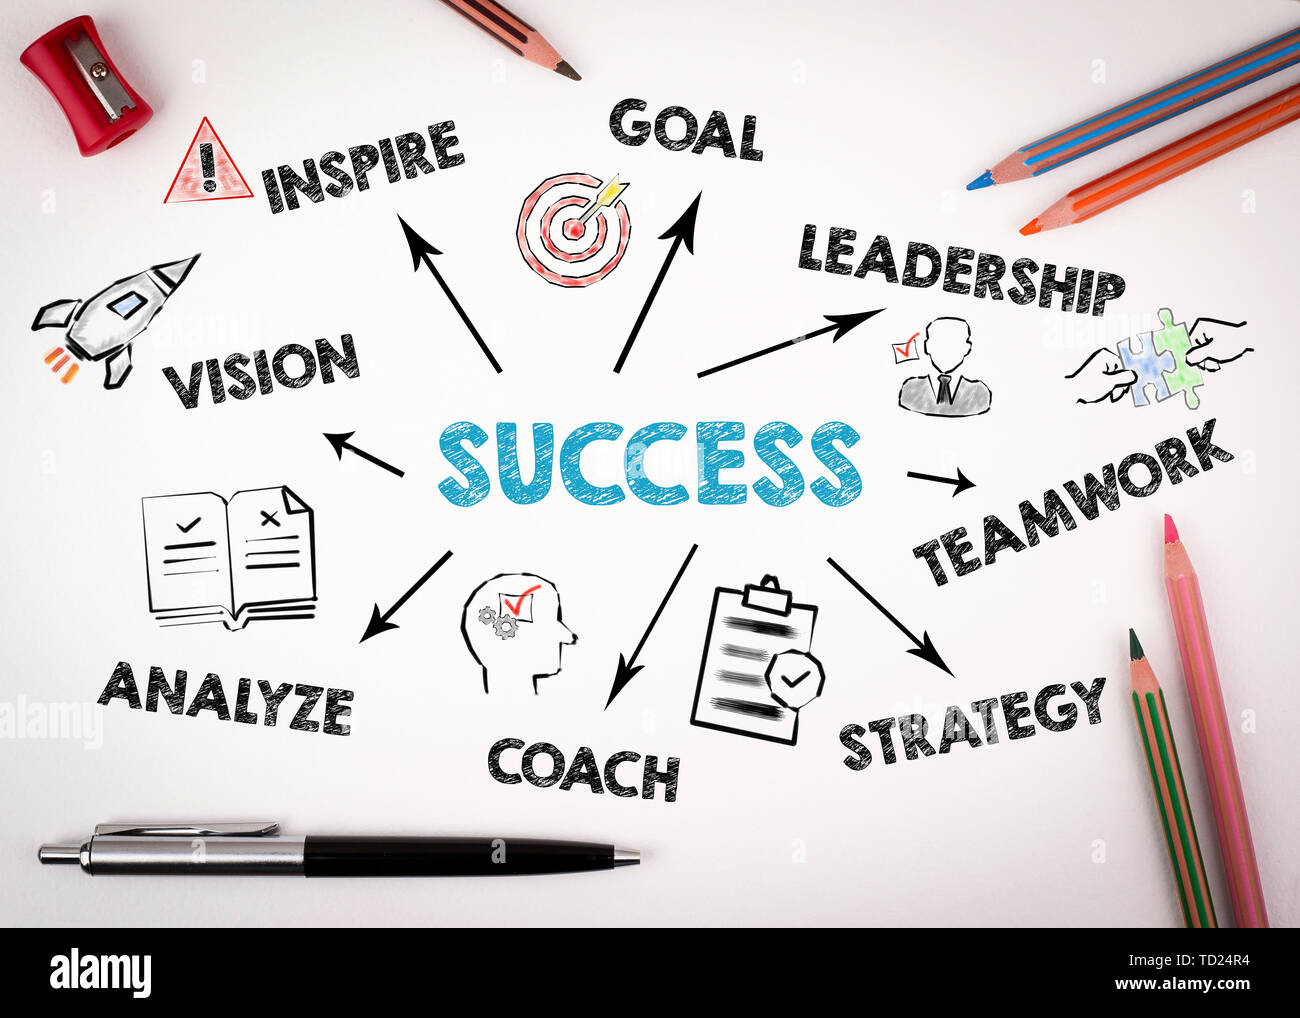 Success Concept. Chart with keywords and icons Stock Photo